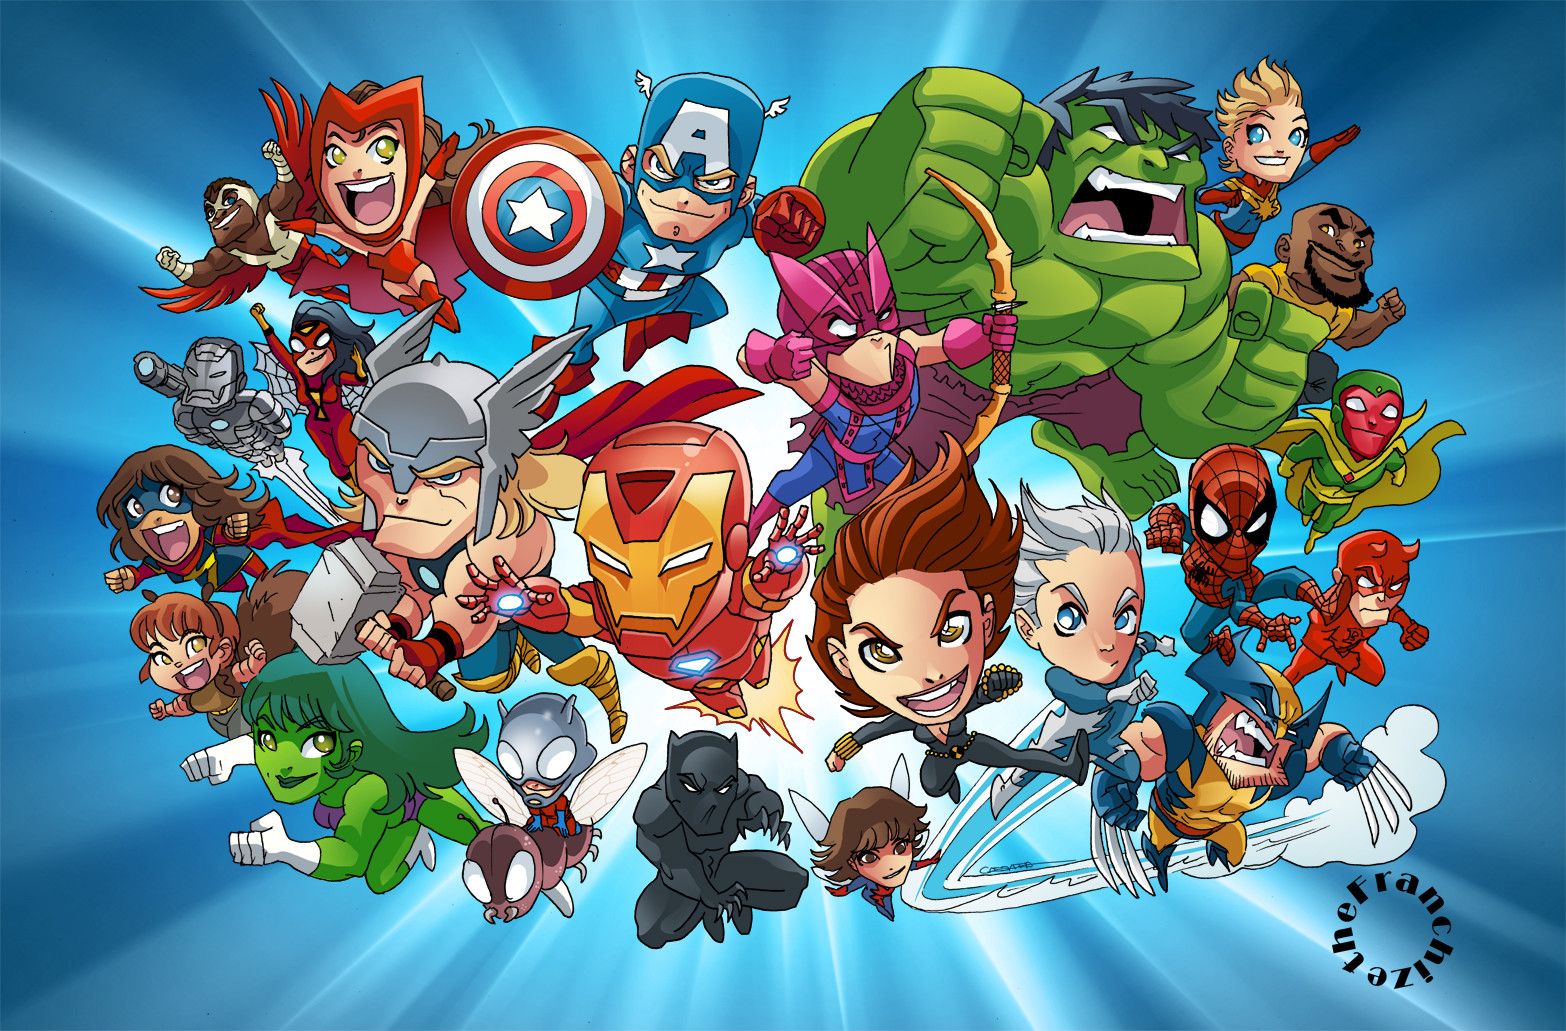 Chibi avengers free HQ online Puzzle Games on Newcastlebeach 2020!